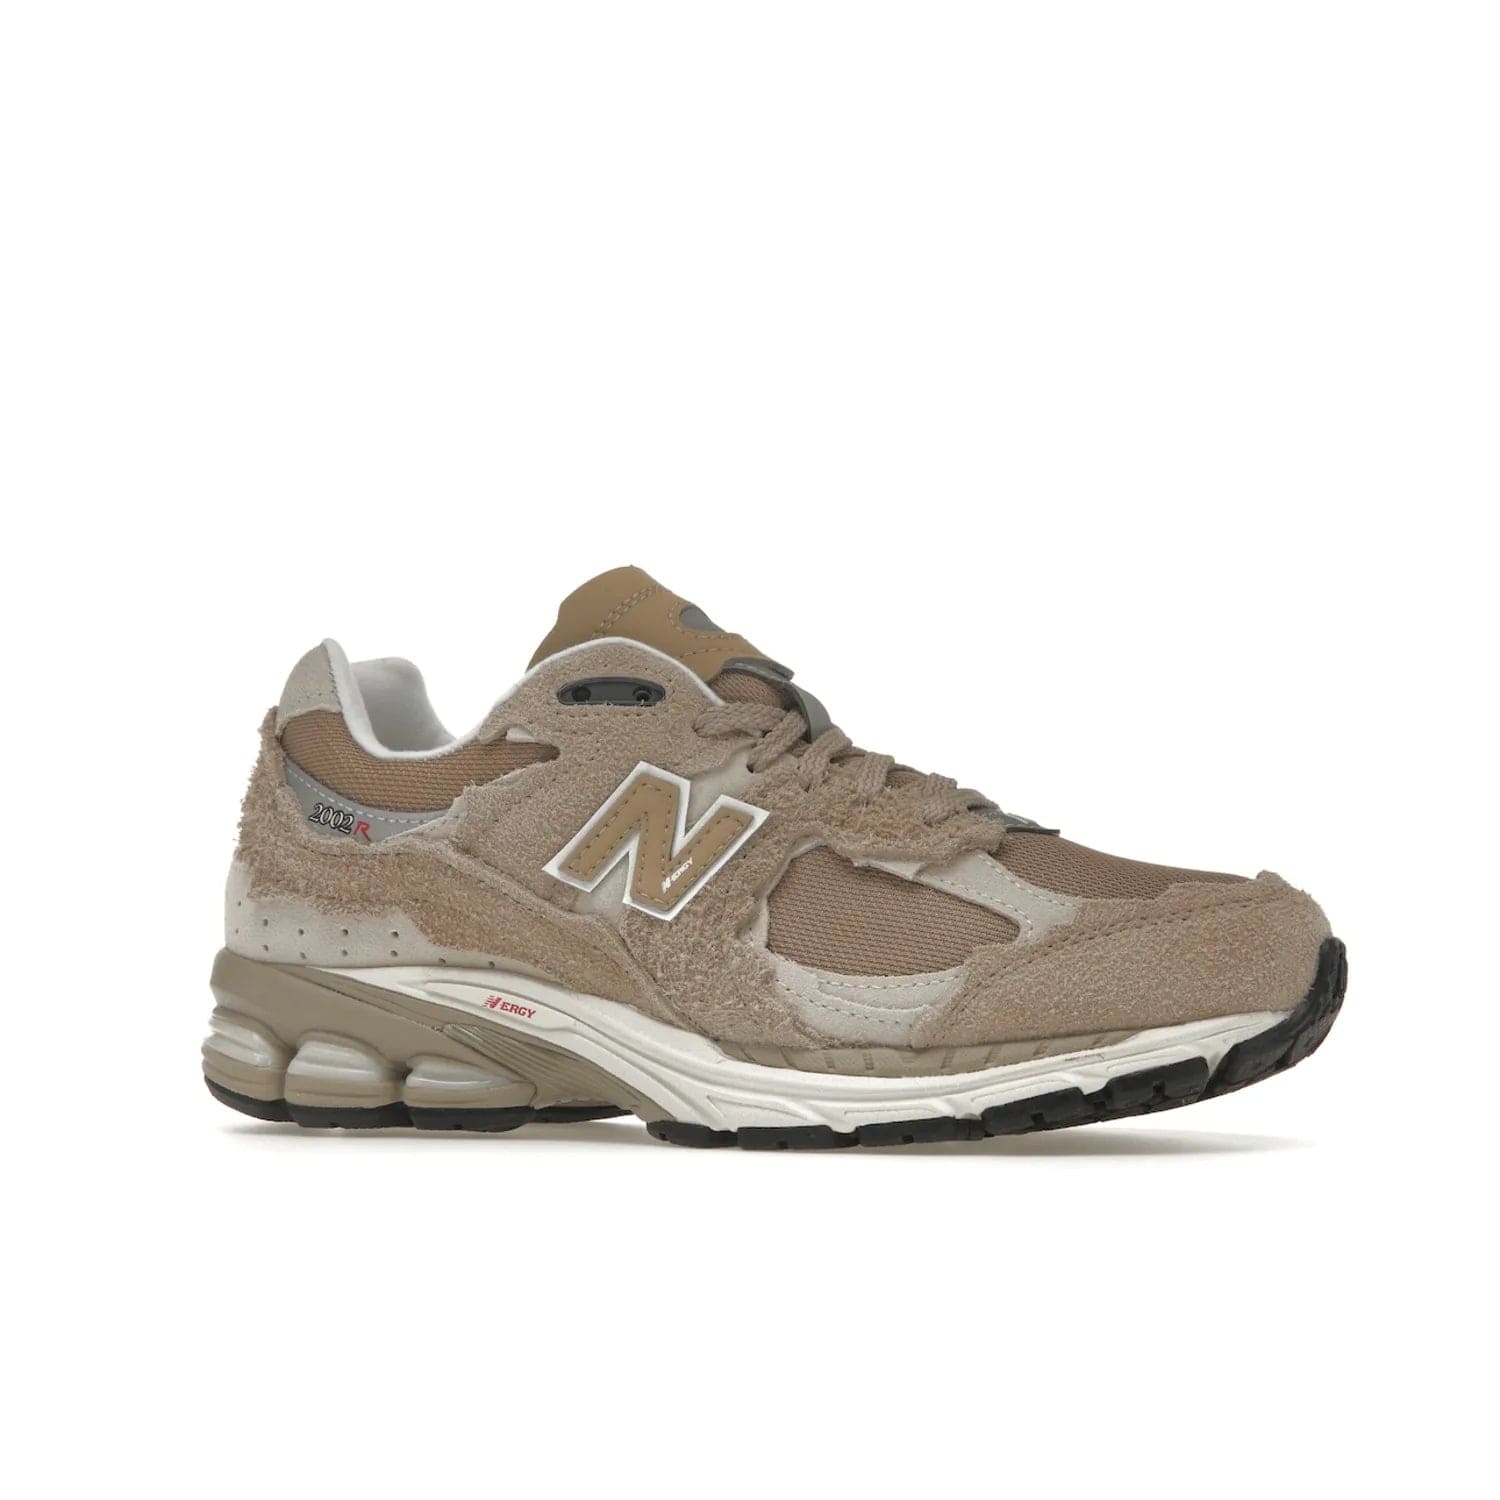 New Balance 2002R Protection Pack Driftwood - Image 3 - Only at www.BallersClubKickz.com - The New Balance 2002R Driftwood Protection Pack is a fashionable yet comfortable sneaker perfect for any occasion. Features include hairy suede uppers, breathable mesh, underfoot support, 3M reflective details, and more. Stylishly dress up your look with this shoe, available March 2023.